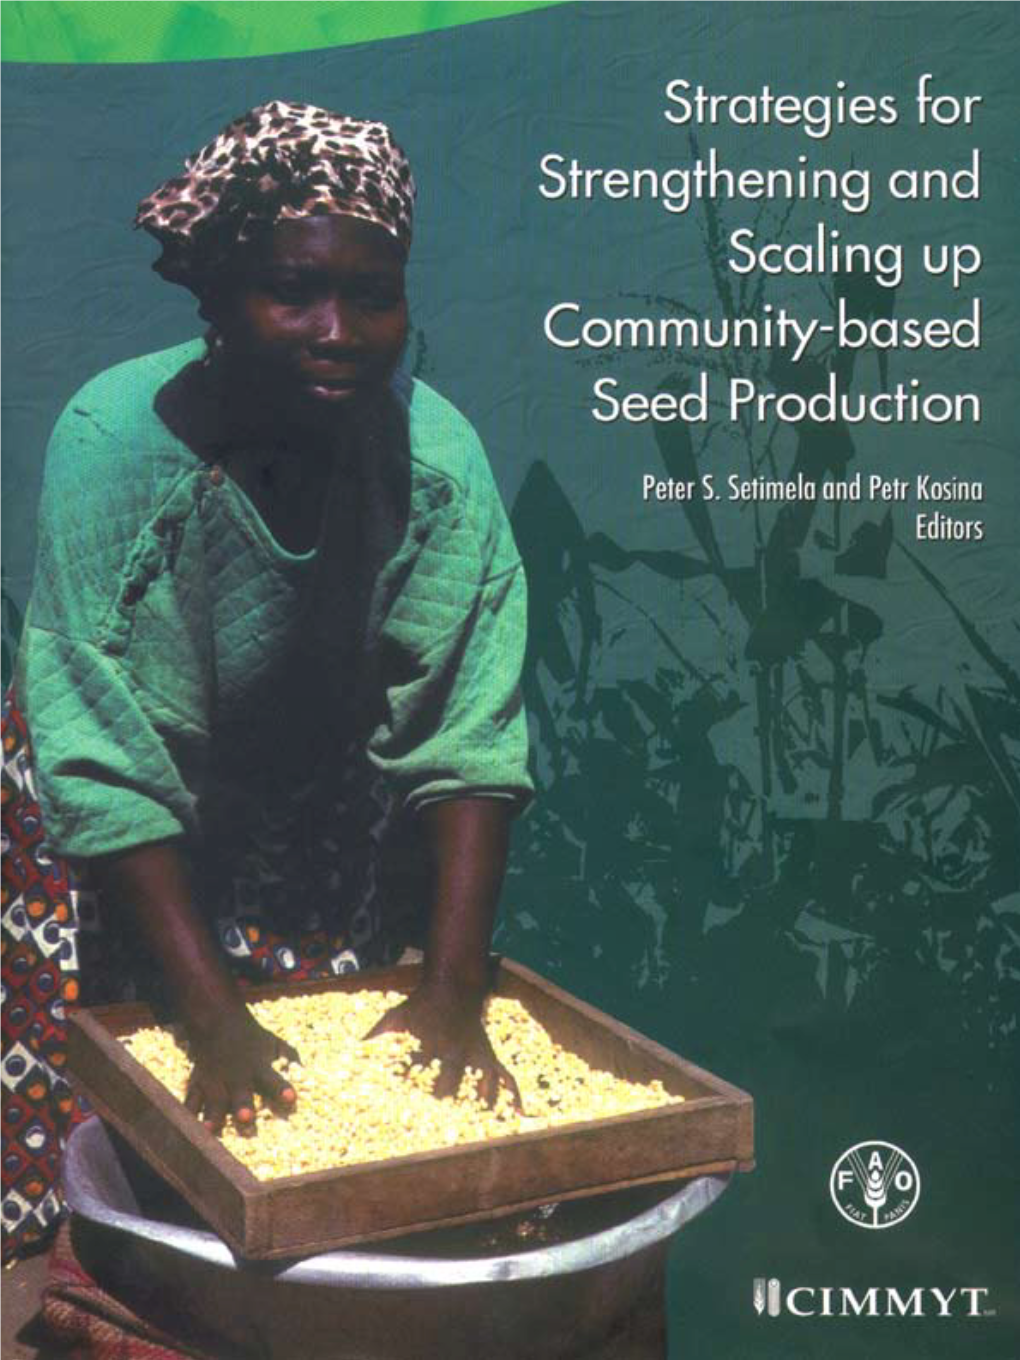 Seedproduction.Pdf